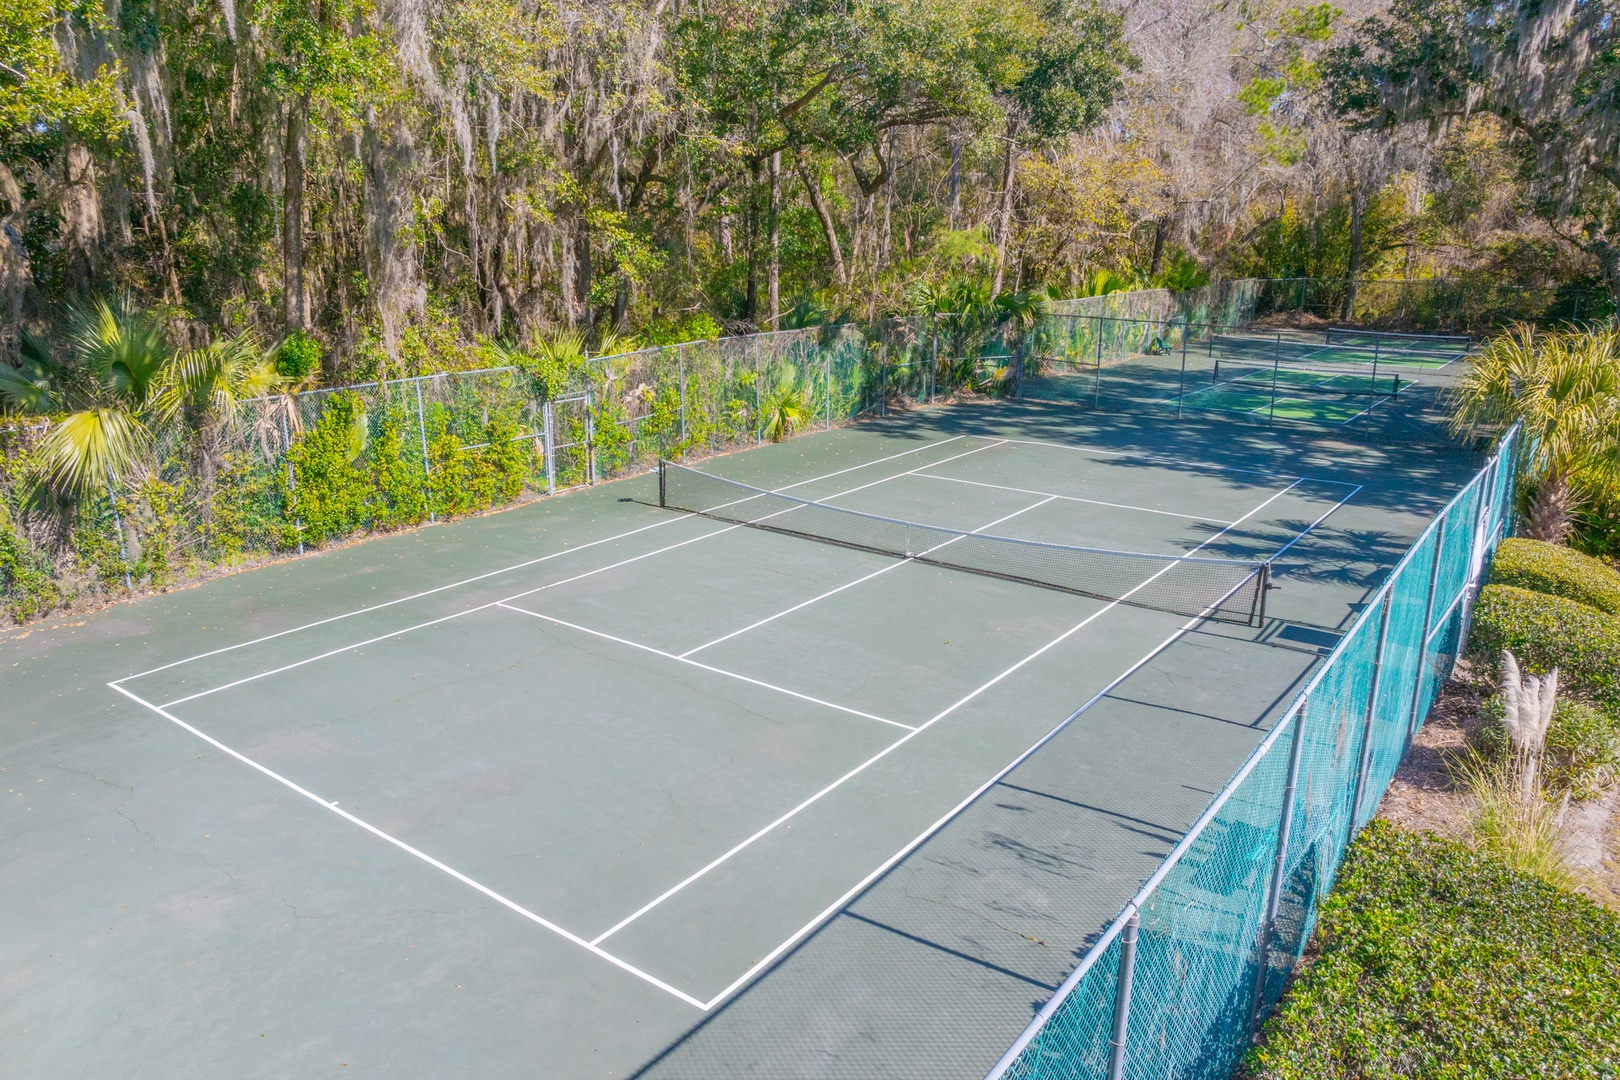 Game, set, match! Enjoy a day on the courts